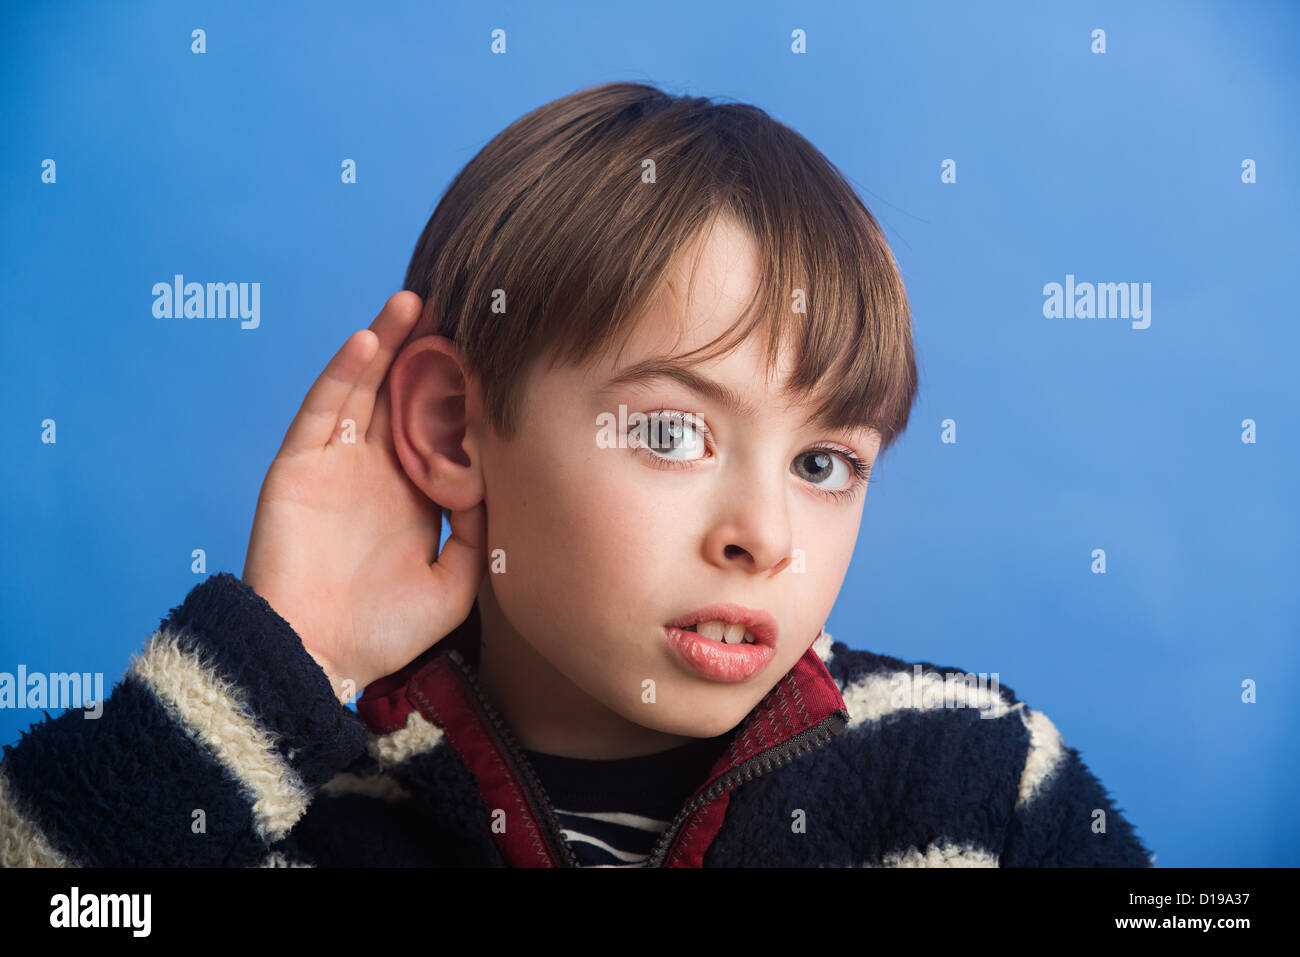 Boy aged 8 on a blue background cupping ear to improve hearing. Showing use of the sense to hear. Stock Photo